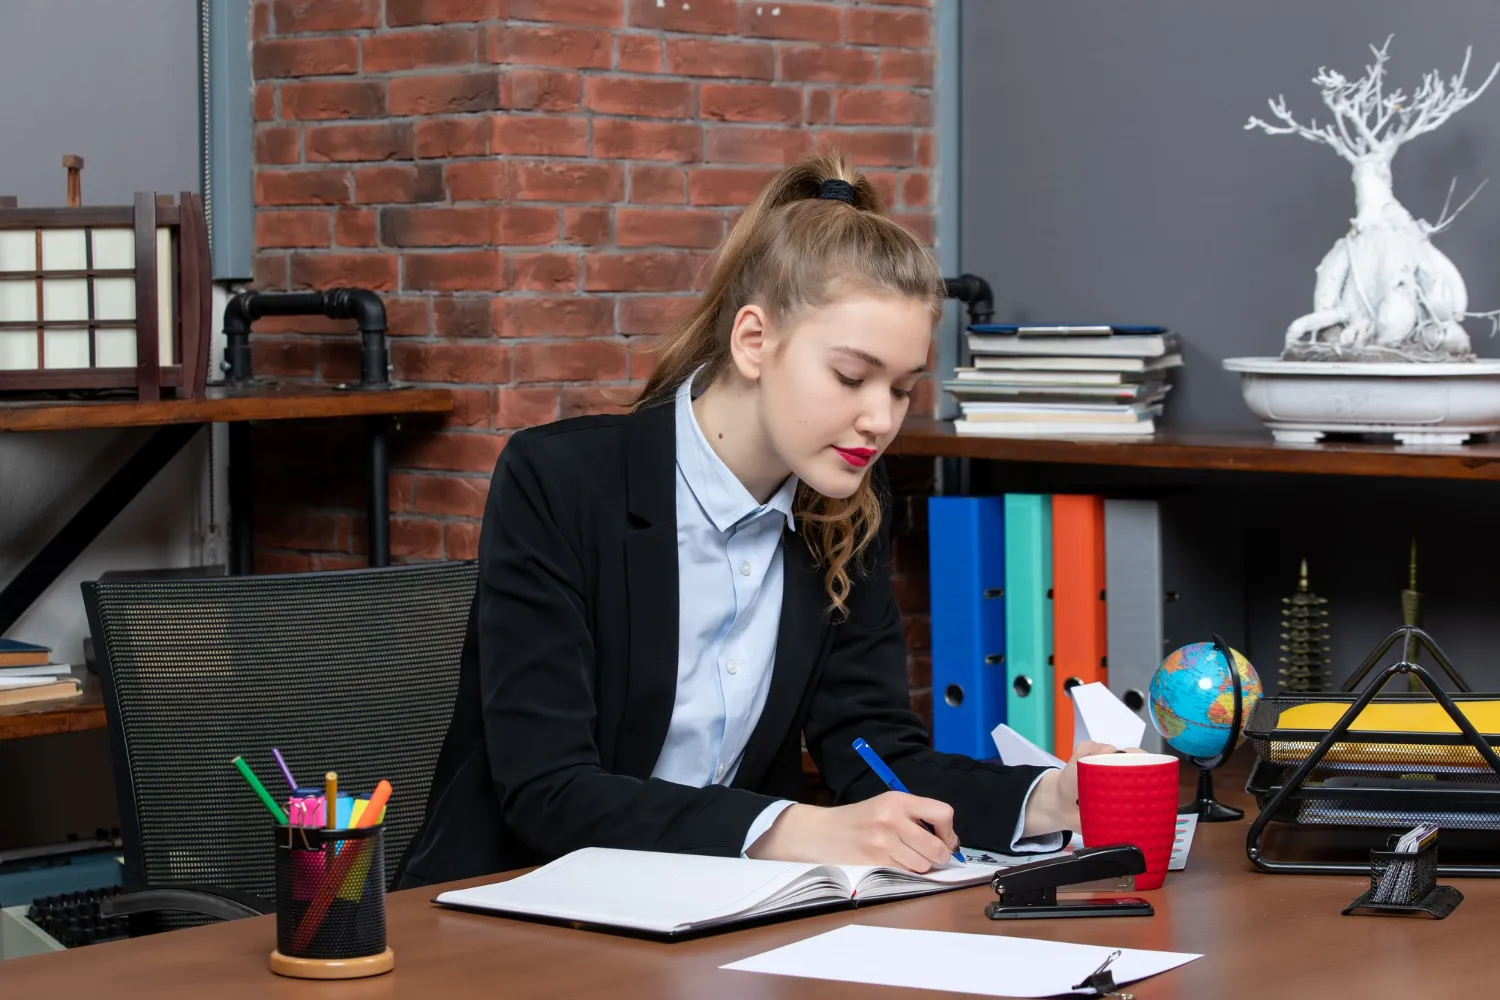 An attentive young professional takes notes, exemplifying the preparation for job interviews as advised by JOH Partners' essential interview guidelines.